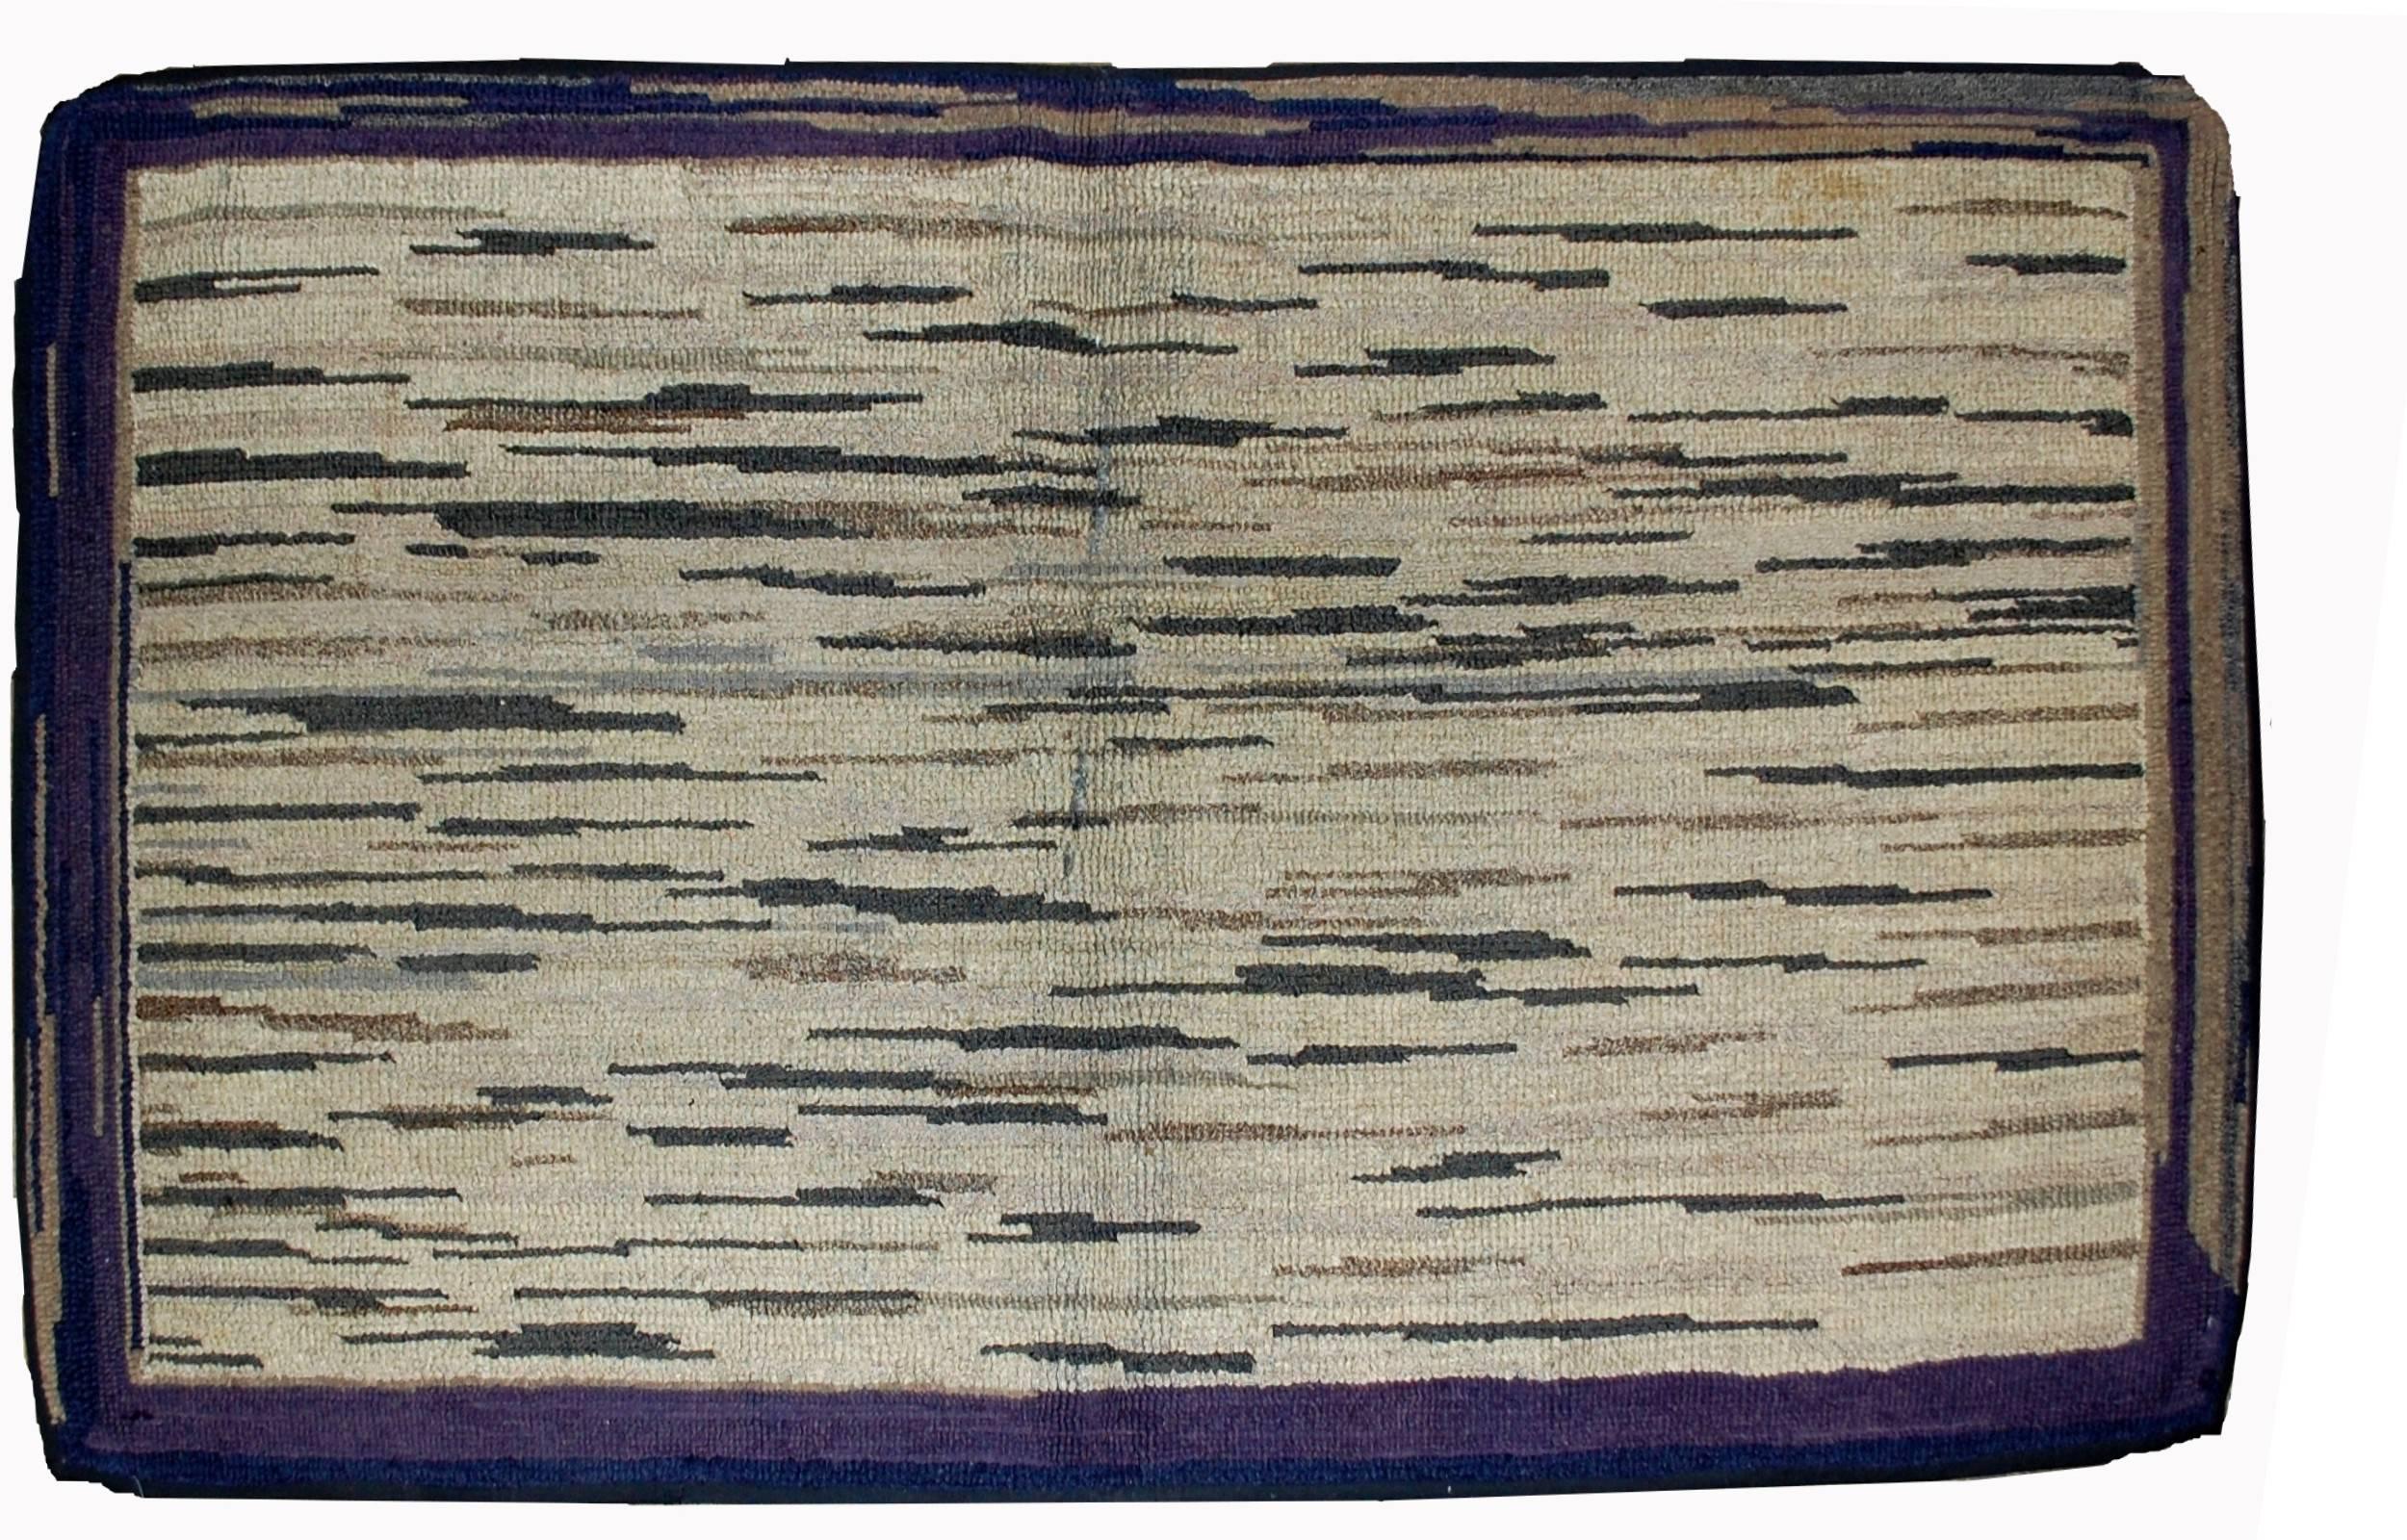 Handmade antique American hooked rug in good condition. The rug made in modern design for that time. Colourful stripes on the beige shade surrounded by purple border. The rug is in original good condition.
   